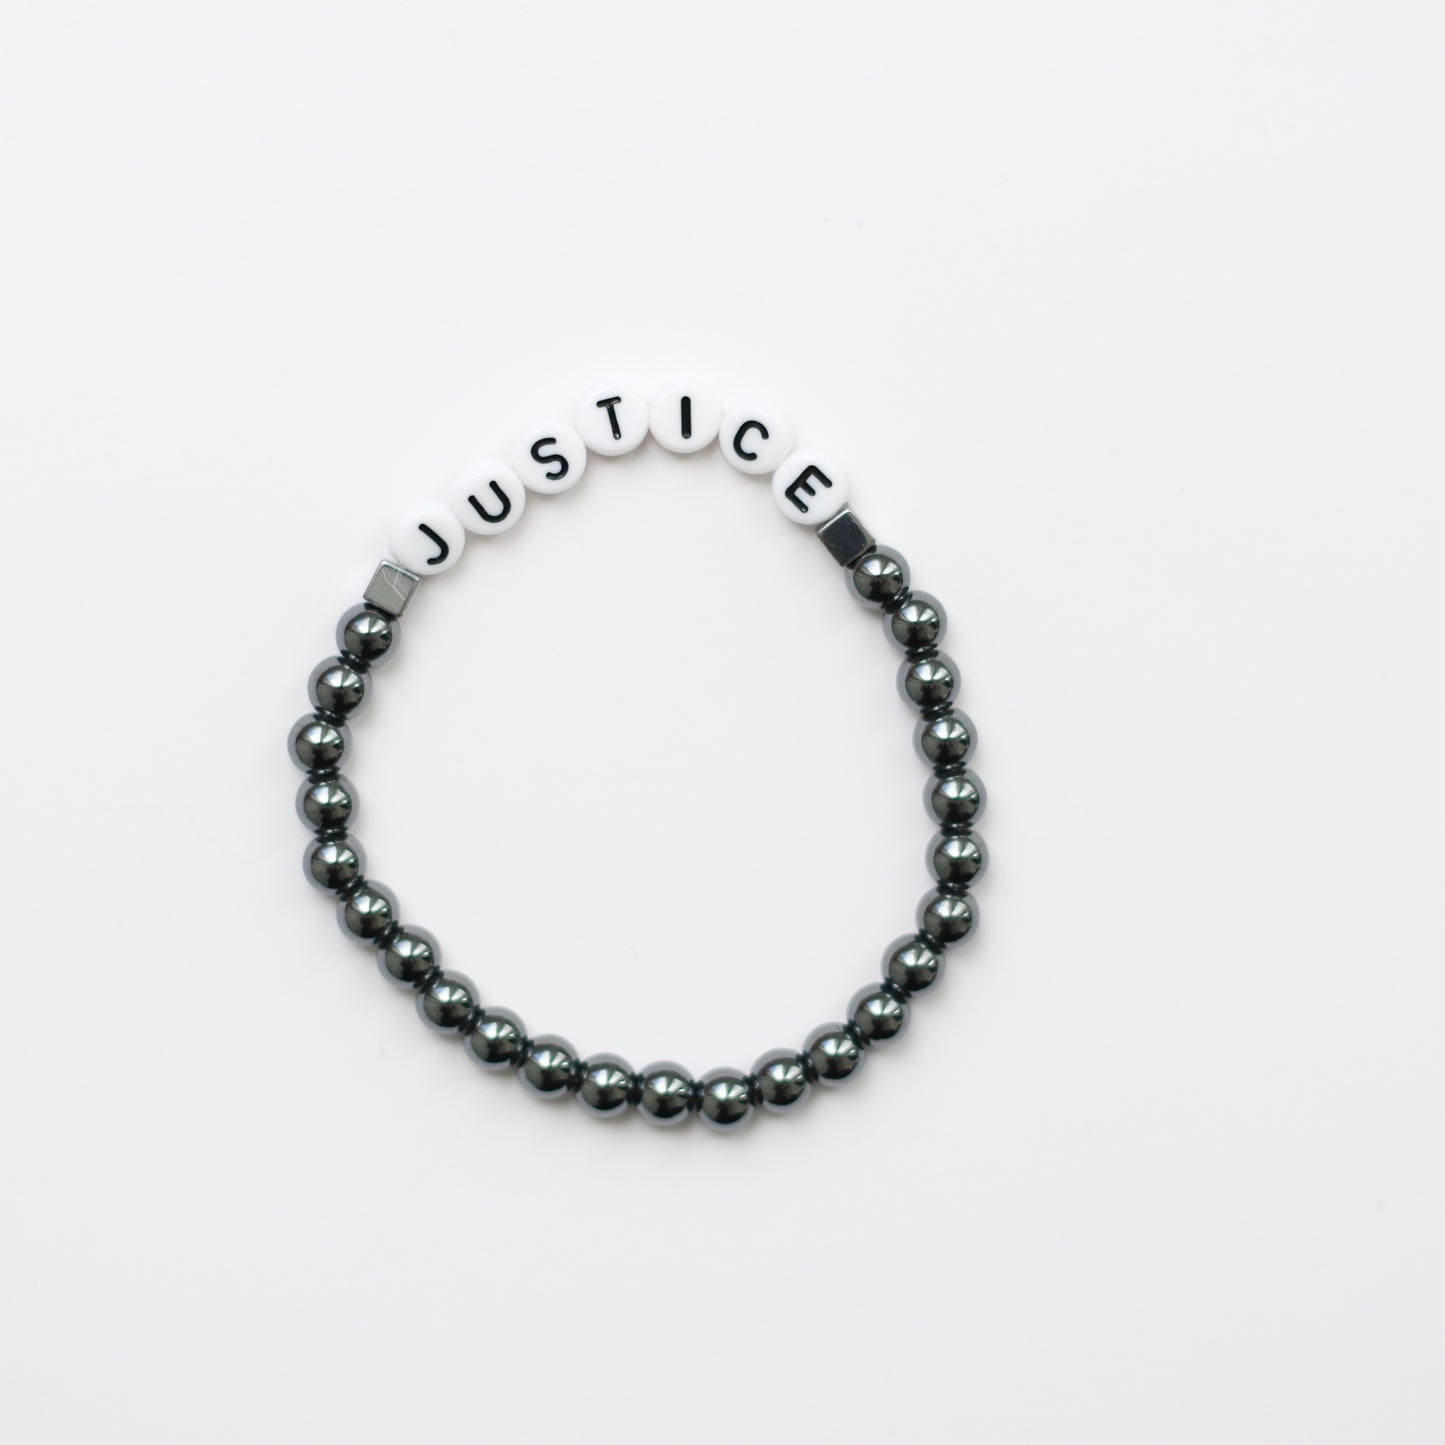 Bead Bracelet with Message